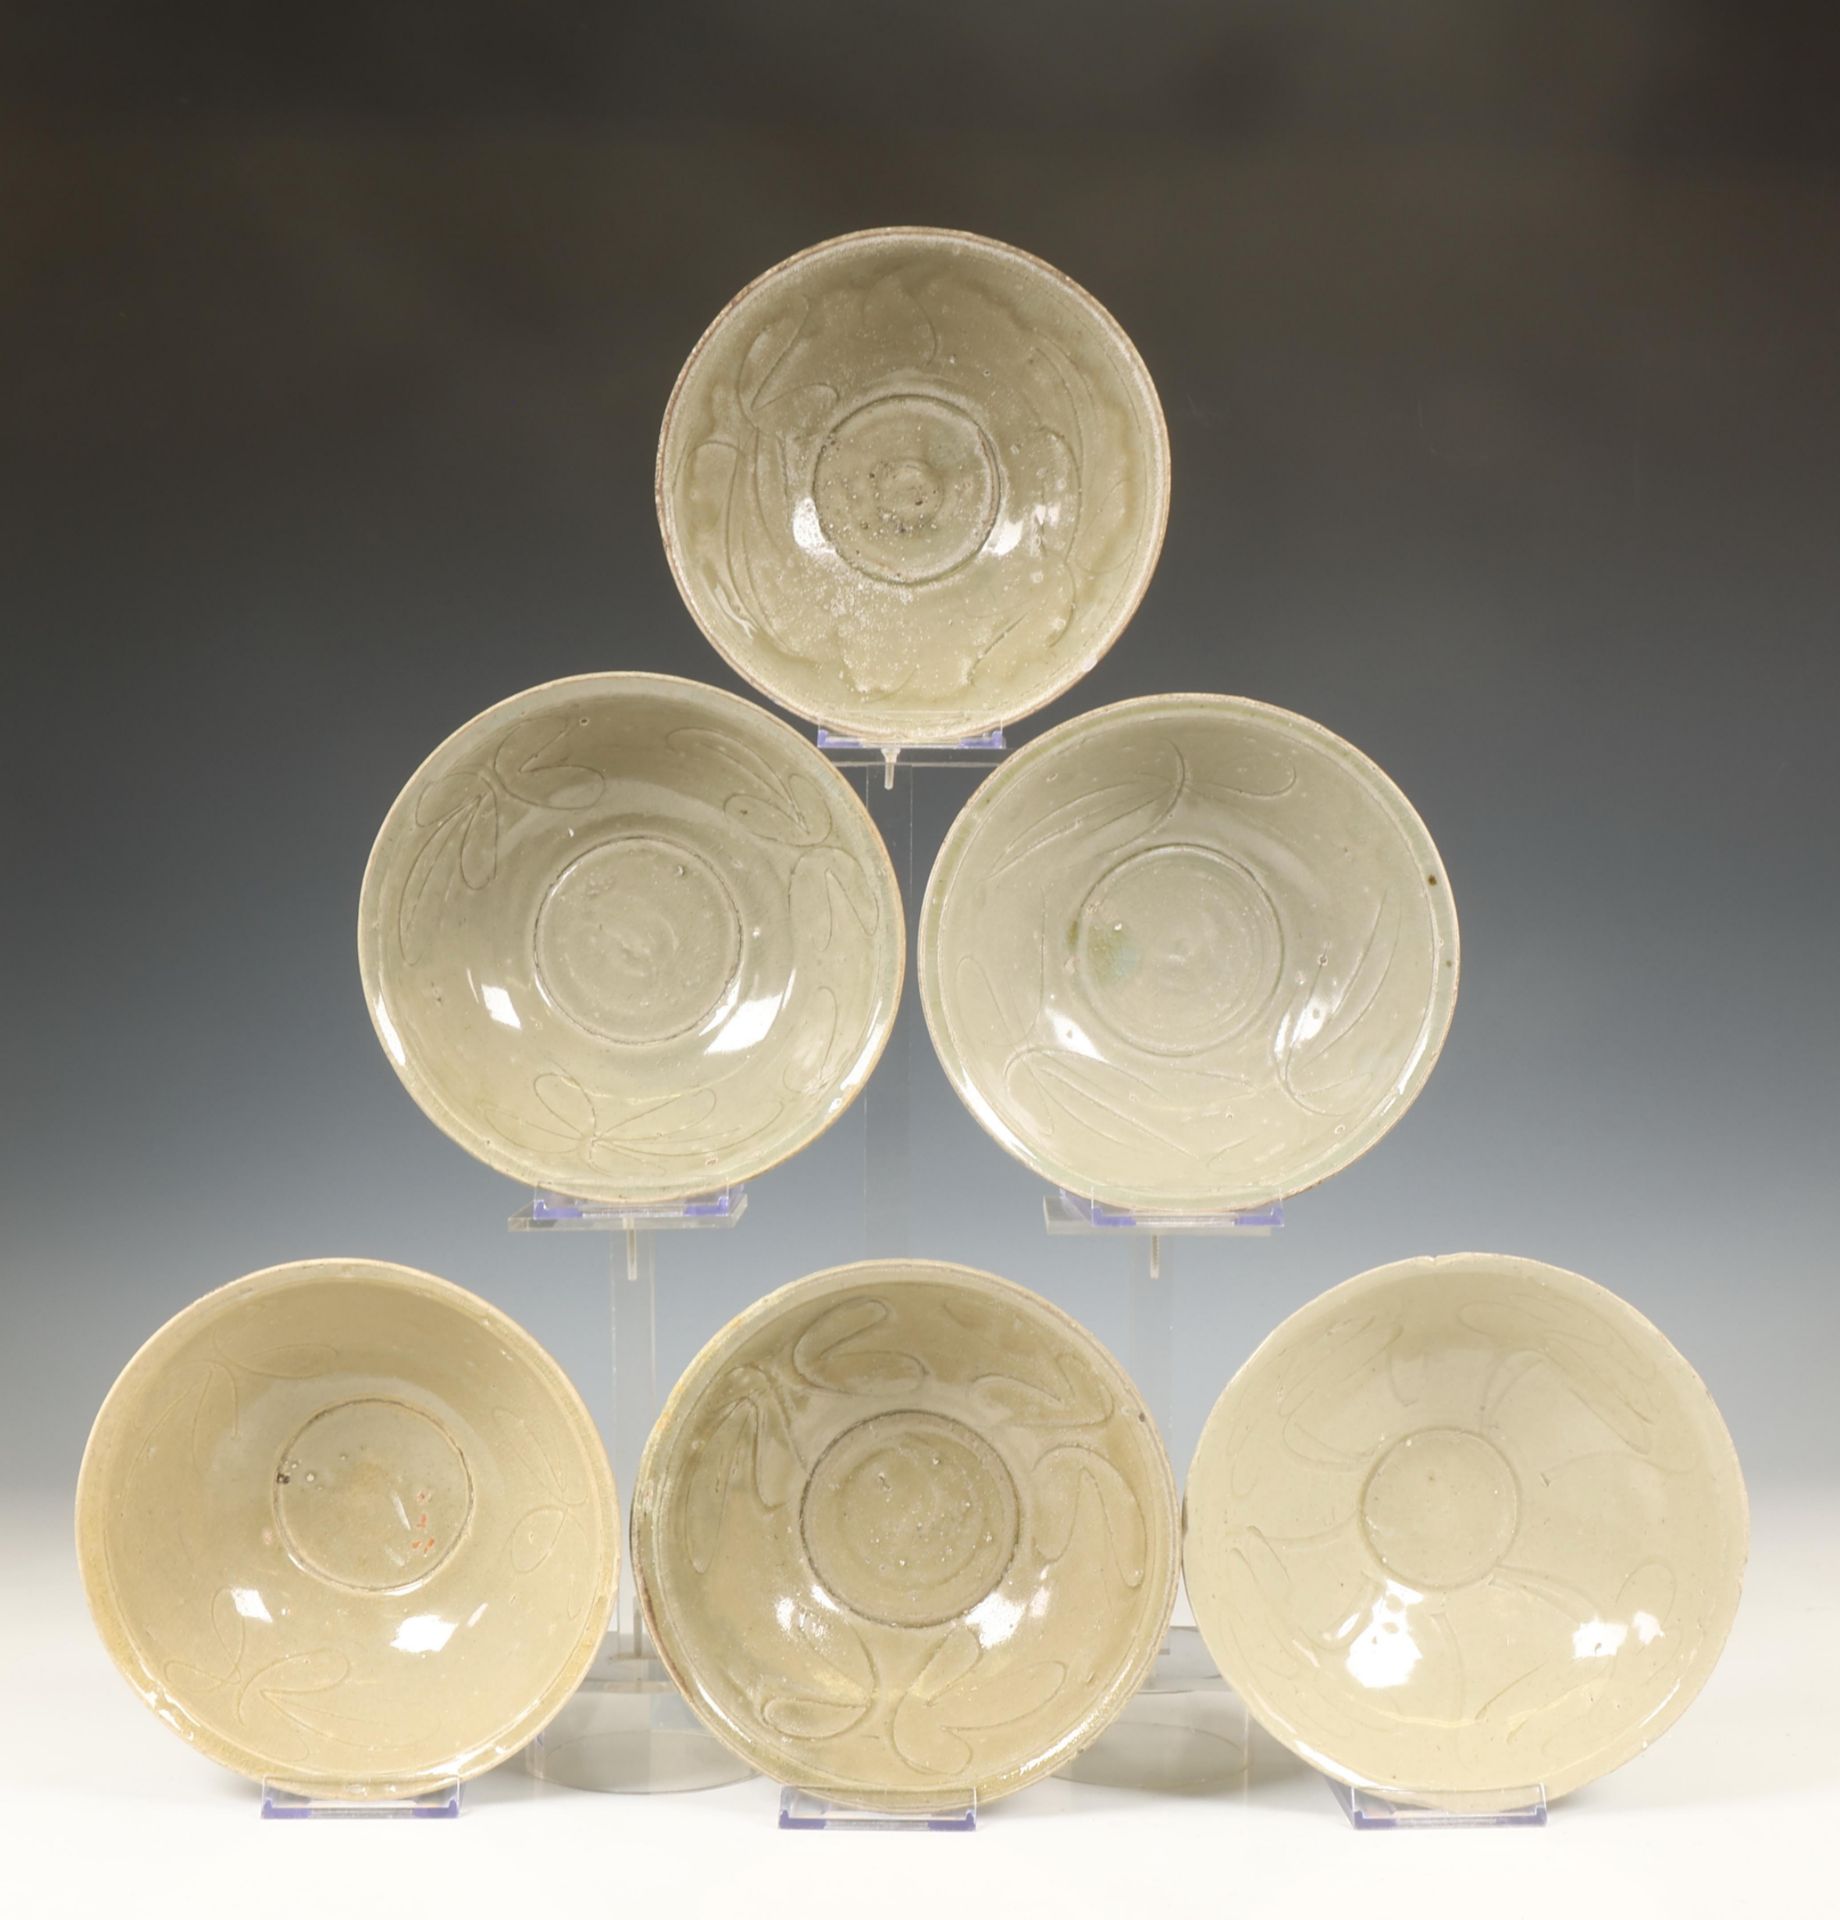 China, collection of twelve celadon-glazed bowls, Northern Song dynasty, 10th-12th century,